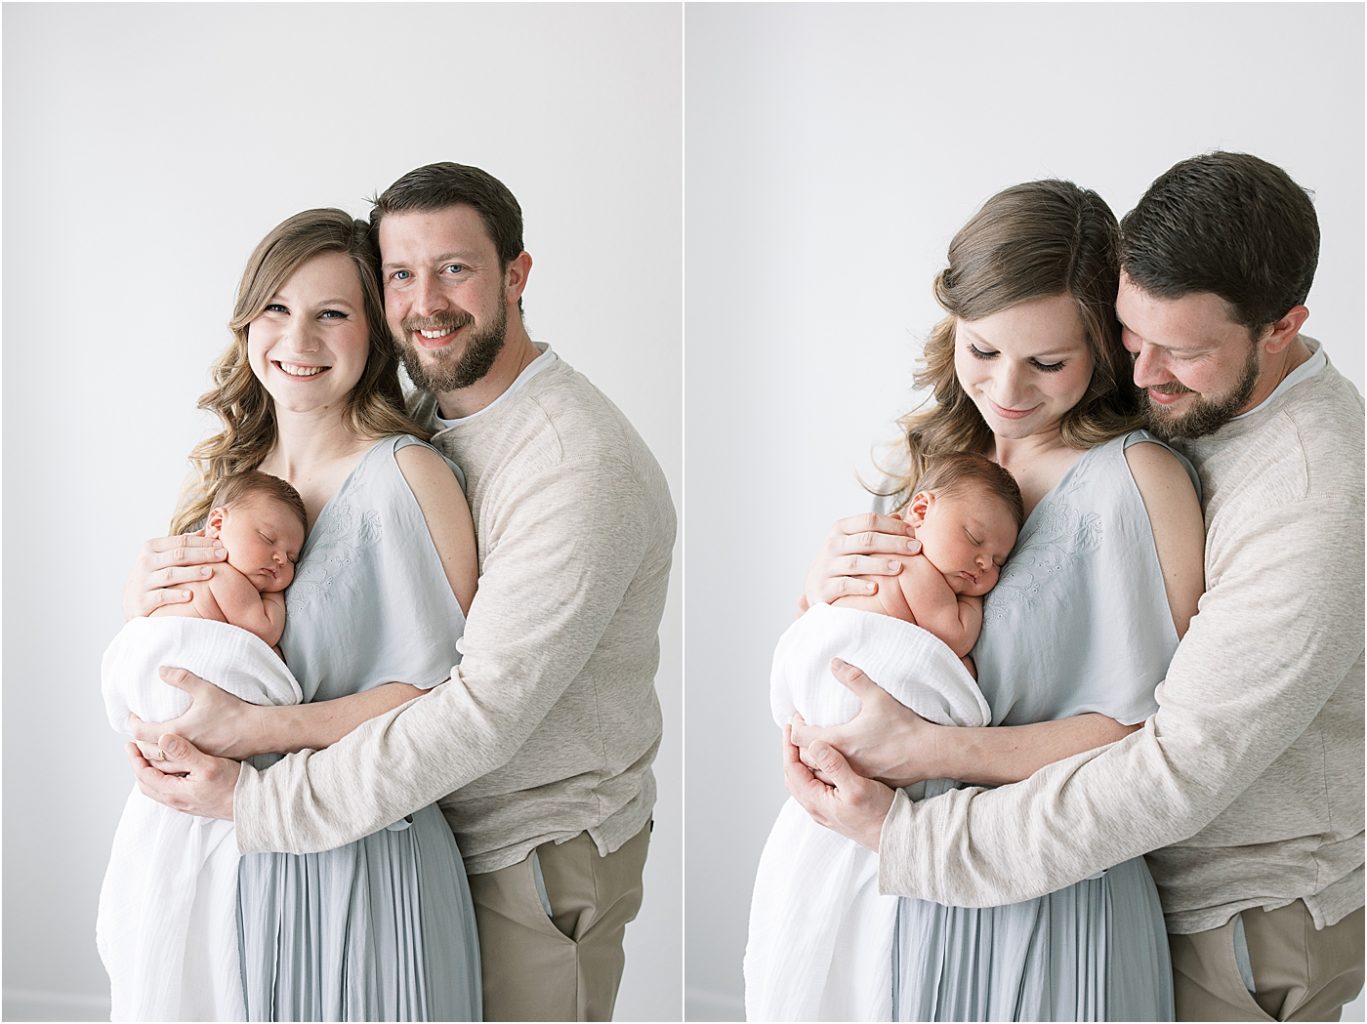 Studio newborn session with new parents and baby boy. Photos by Bloomington Newborn Photographer, Lindsay Konopa Photography.